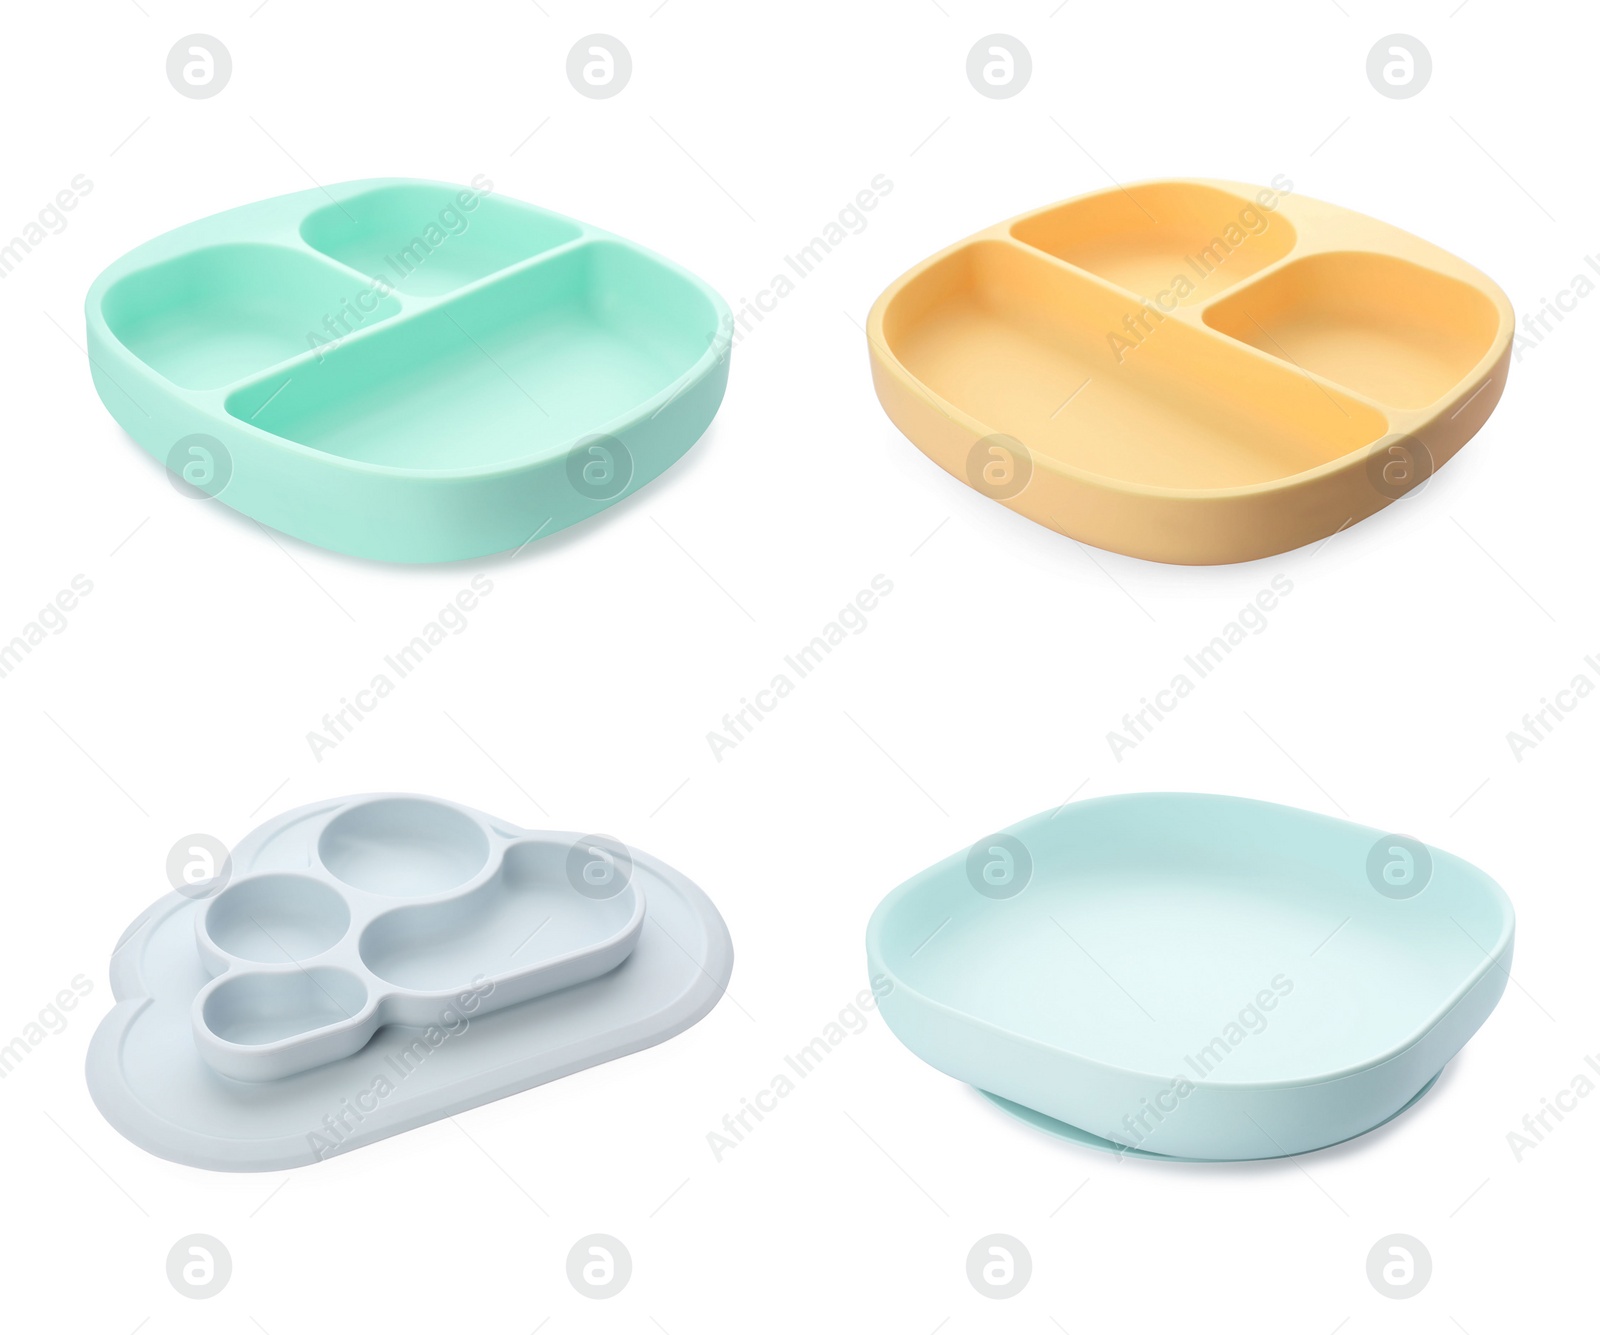 Image of Set with different plates on white background. Serving baby food